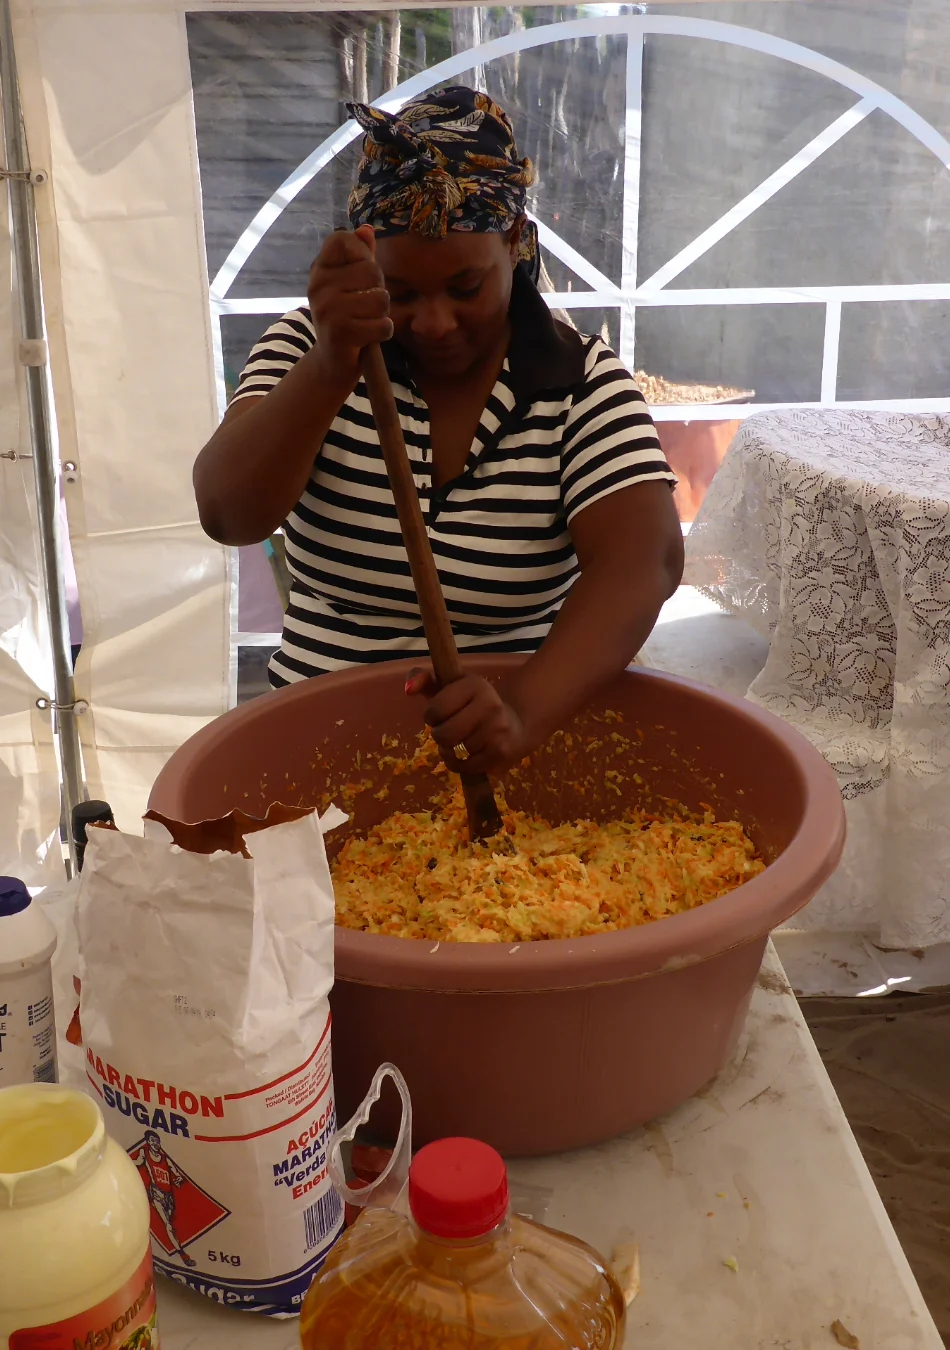 A woman inside a tent in a village in the north, energetically mixing coleslaw salad ingredients in a large bowl with a wooden spoon, surrounded by the rustic charm of a rural setting.